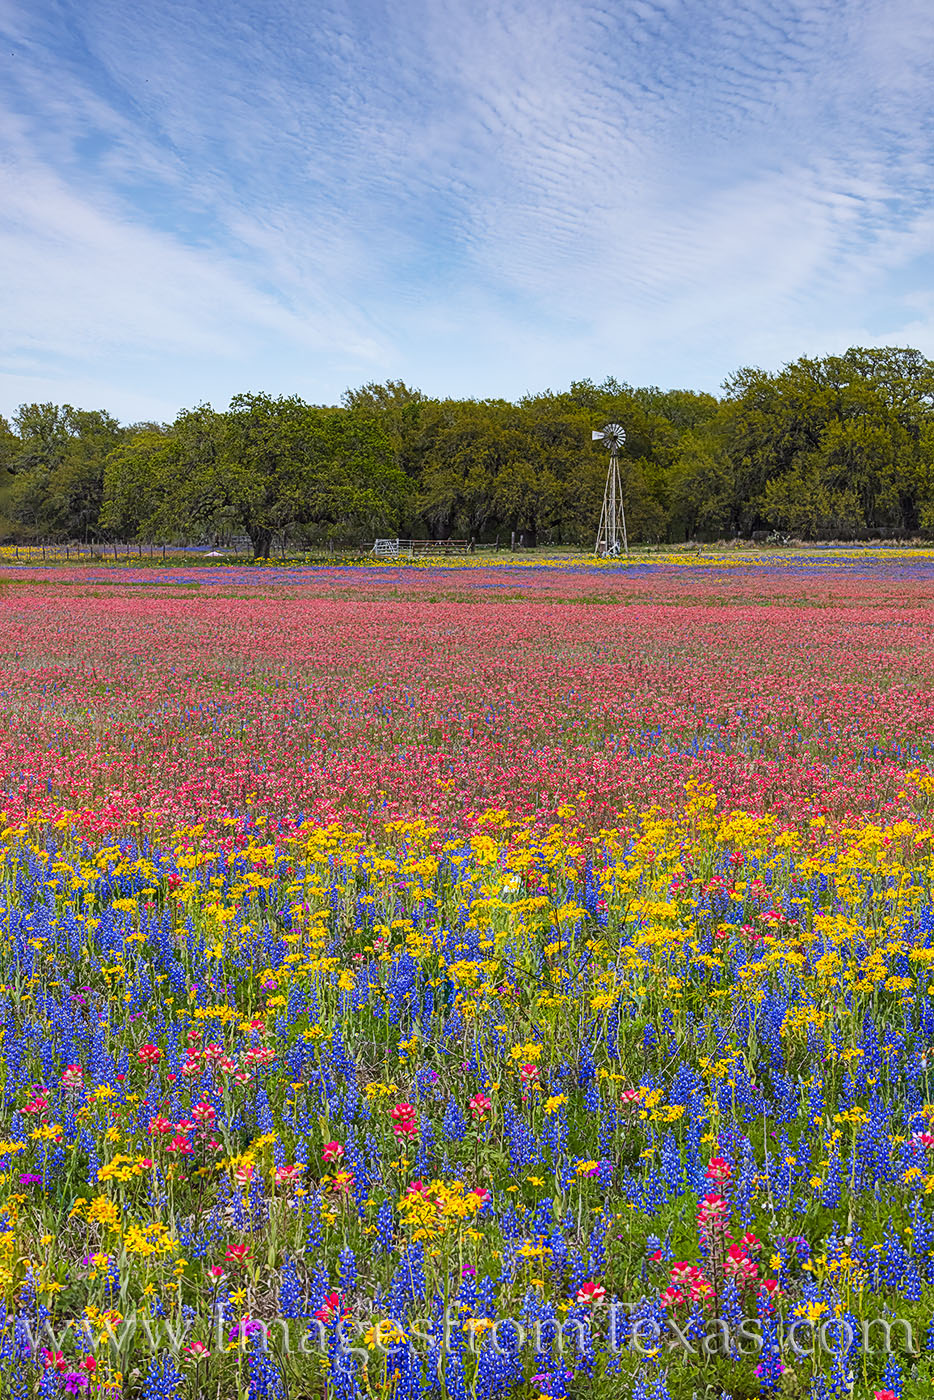 A windmill stands in a field of colorful Texas wildflowers just north of Poteet, Texas. Made up of bluebonnets, Indian Paintbrush...